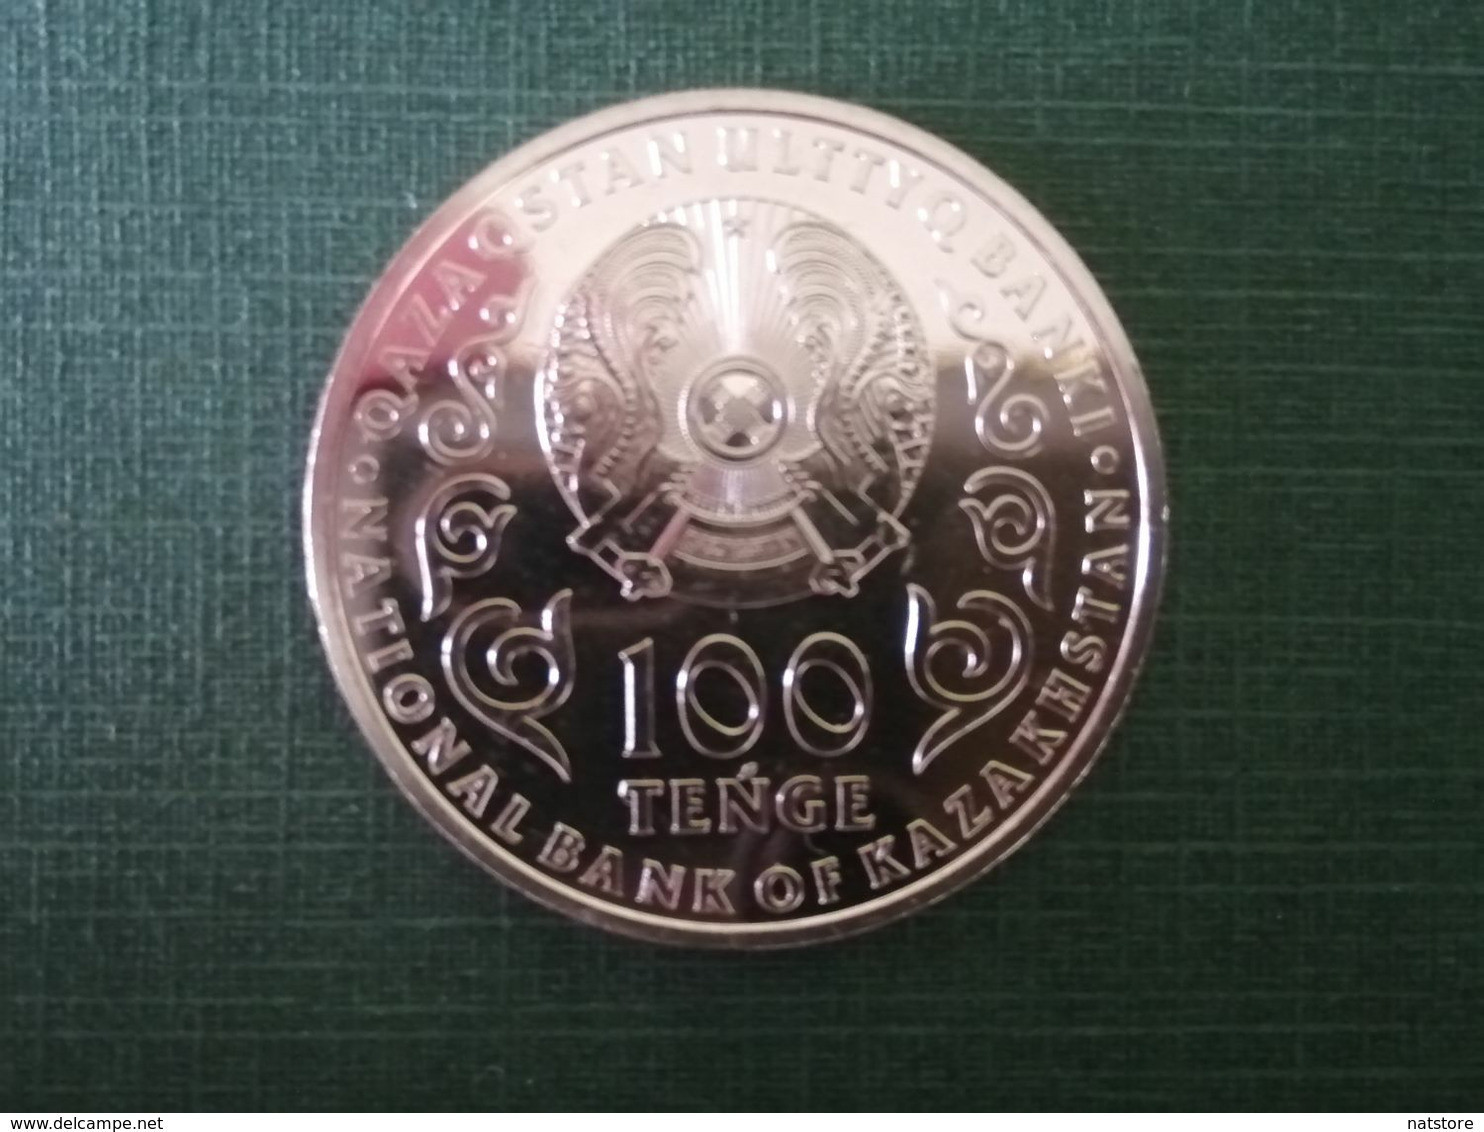 KAZAKHSTAN NEW 2020 COIN 100TENGE DEDICATED TO THE 25TH ANNIVERSARY OF ASSEMBLY OF PEOPLES OF KAZAKHSTAN - Kazakistan